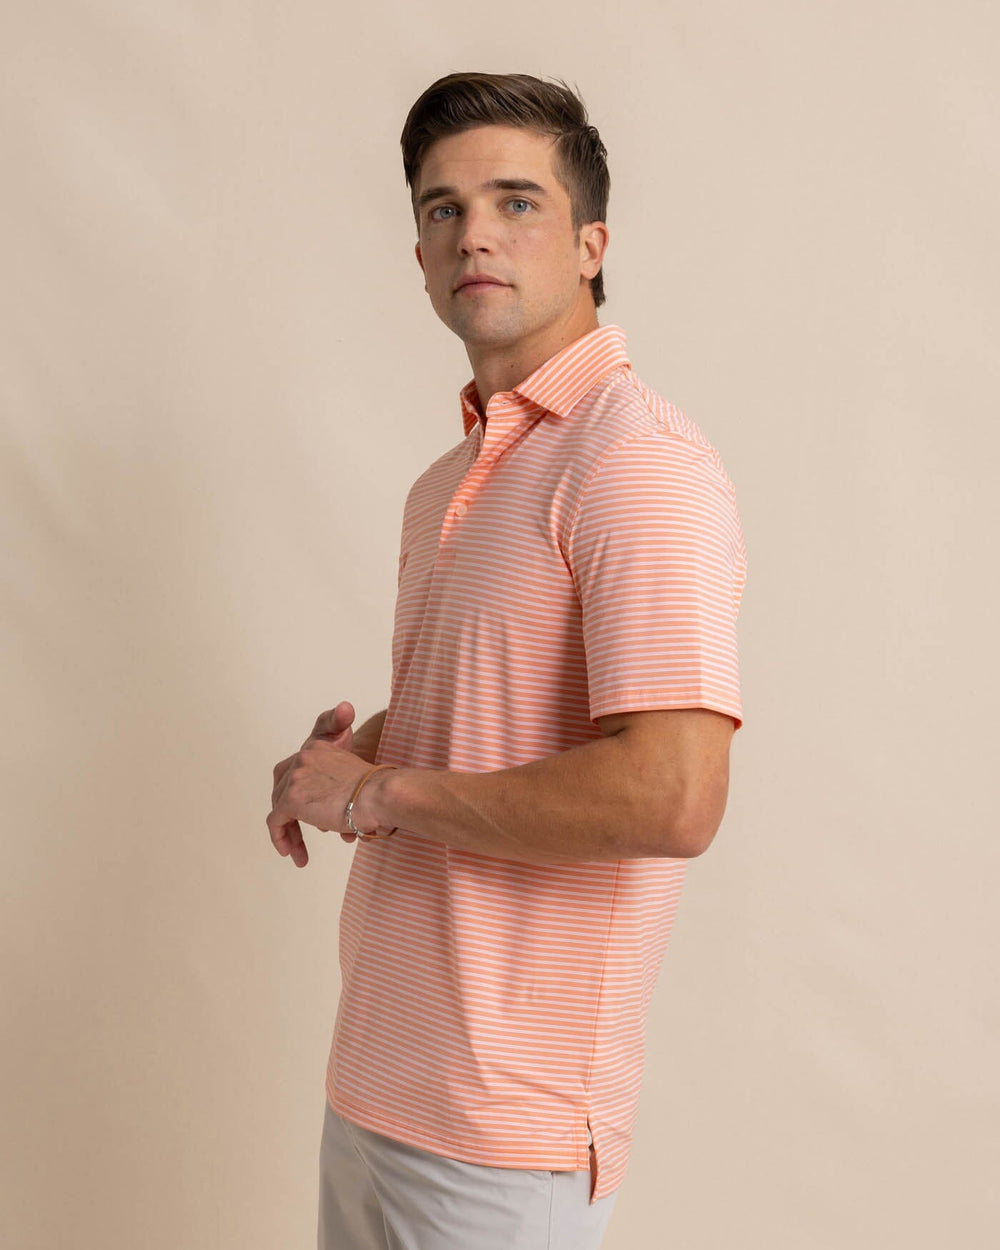 The front view of the Southern Tide brrr eeze Beattie Stripe Performance Polo by Southern Tide - Desert Flower Coral